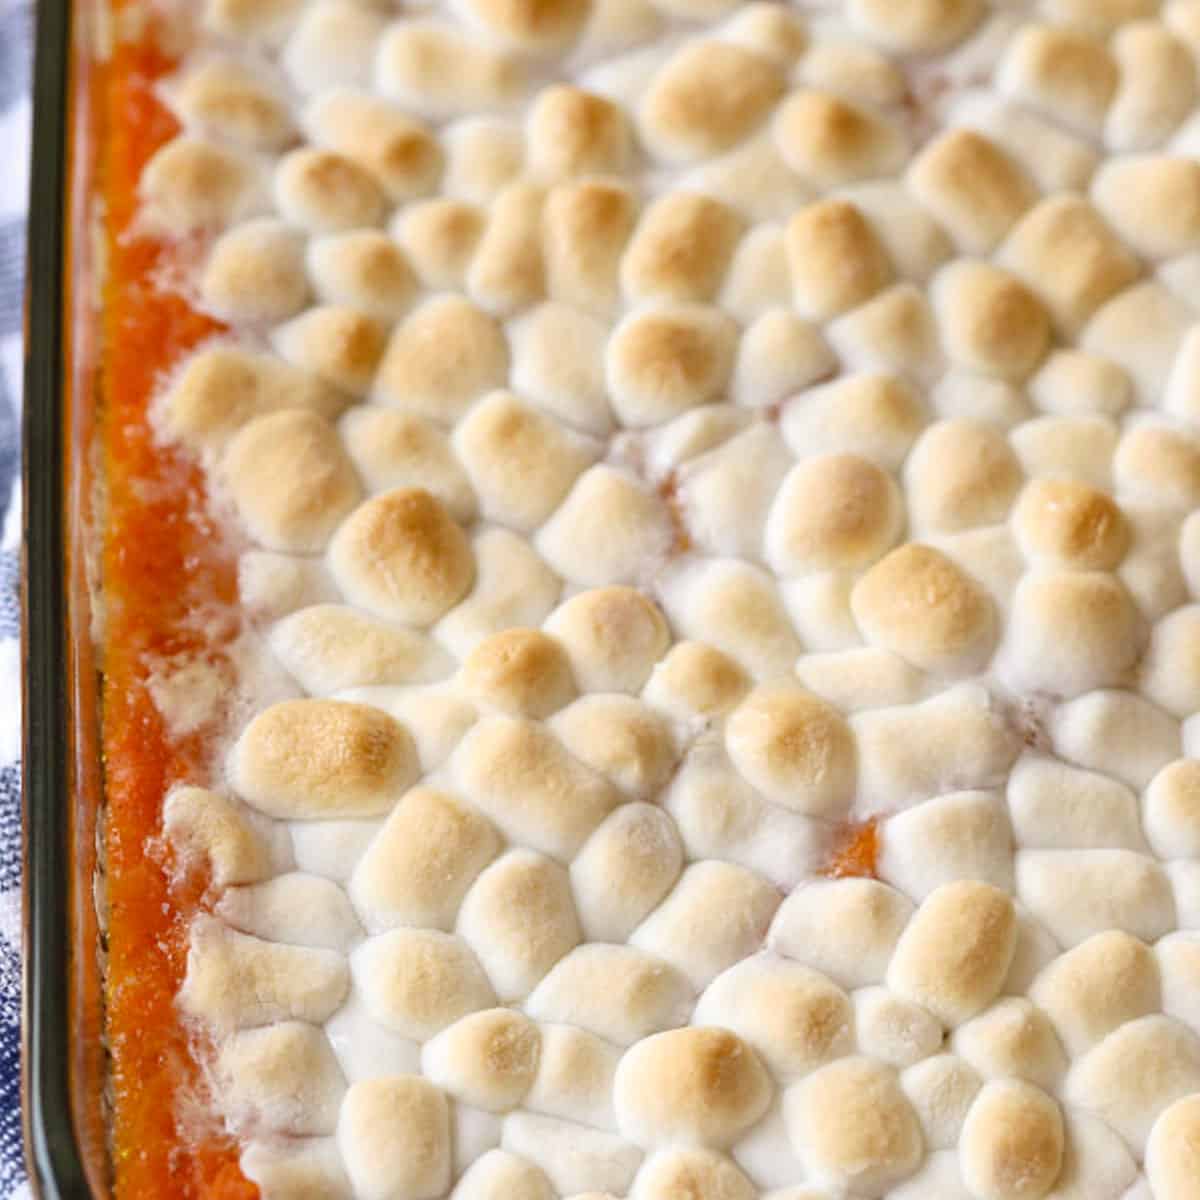 Sweet Potato Casserole in a glass baking dish, covered with marshmallows, mashed sweet potatoes with marshmallows.